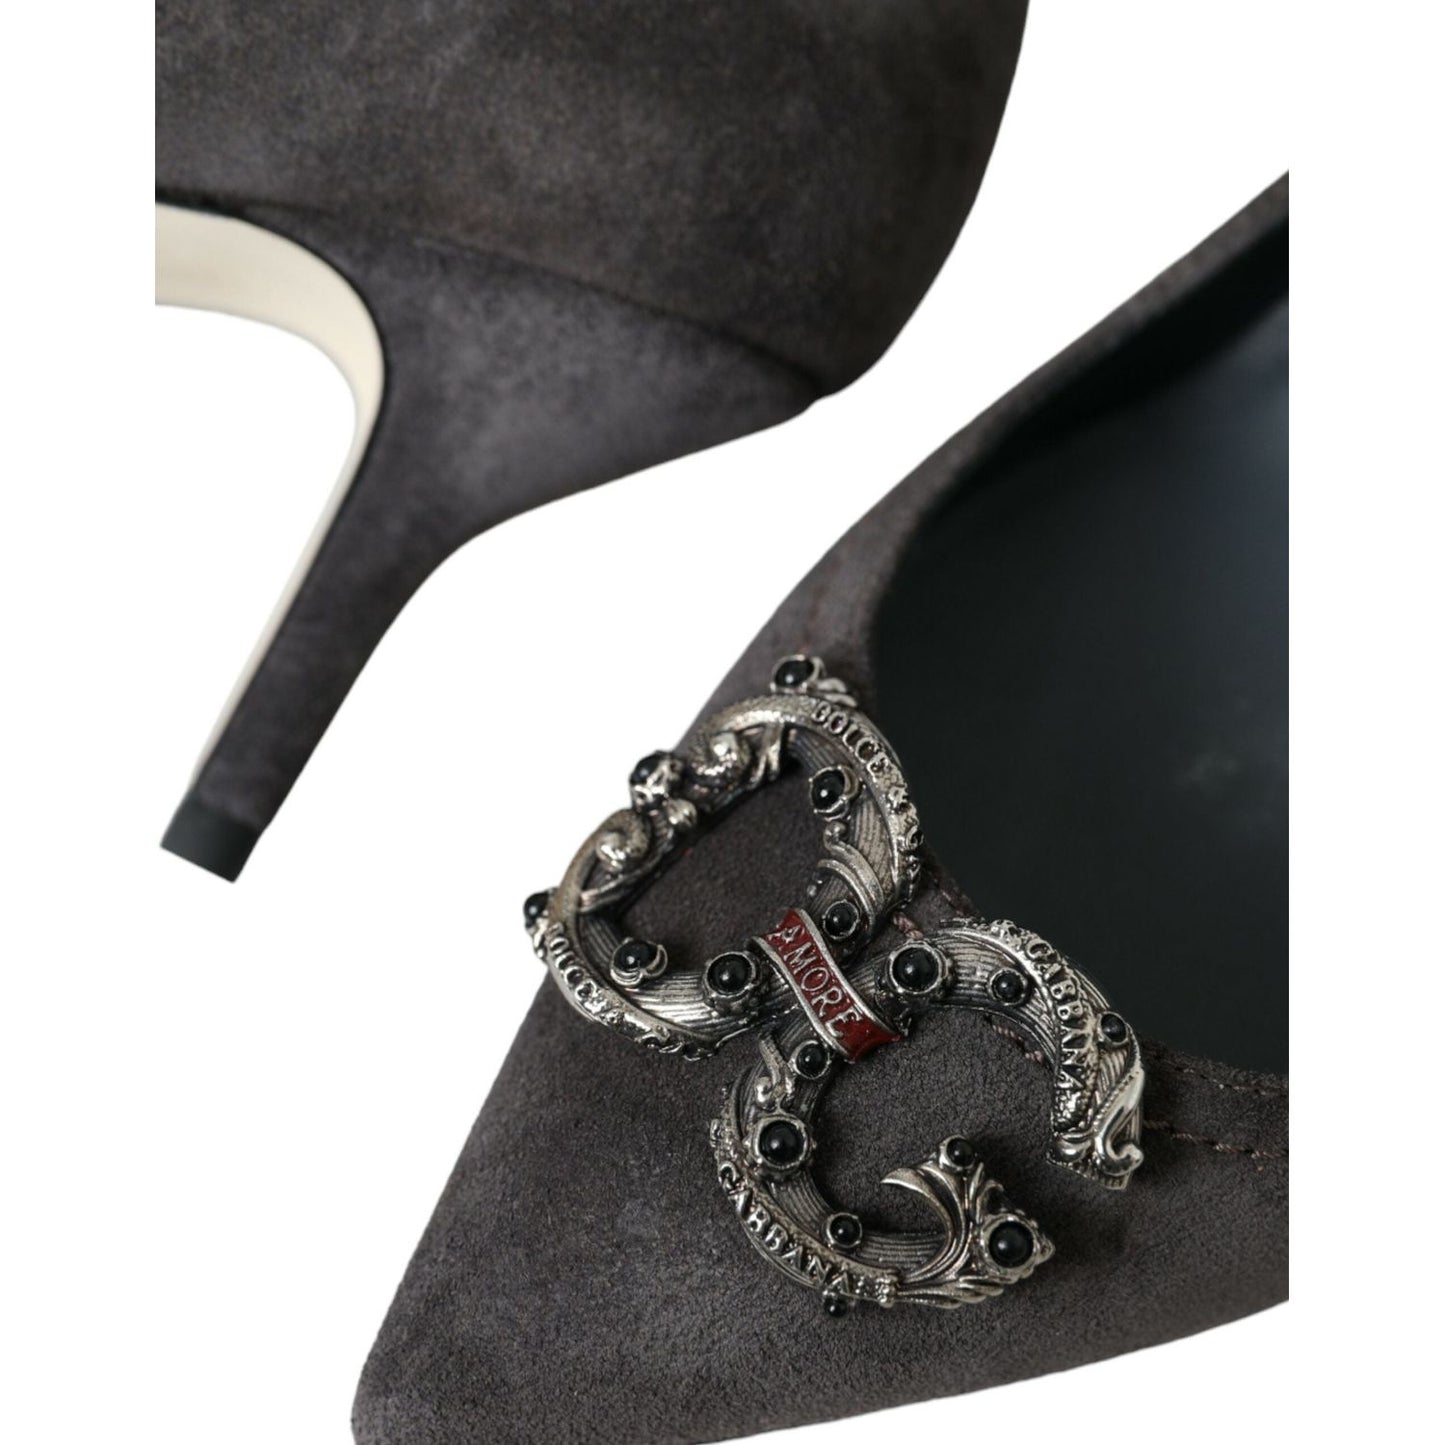 Dolce & Gabbana Gray Amore Suede Bellucci Heels Pumps Shoes gray-amore-suede-bellucci-heels-pumps-shoes